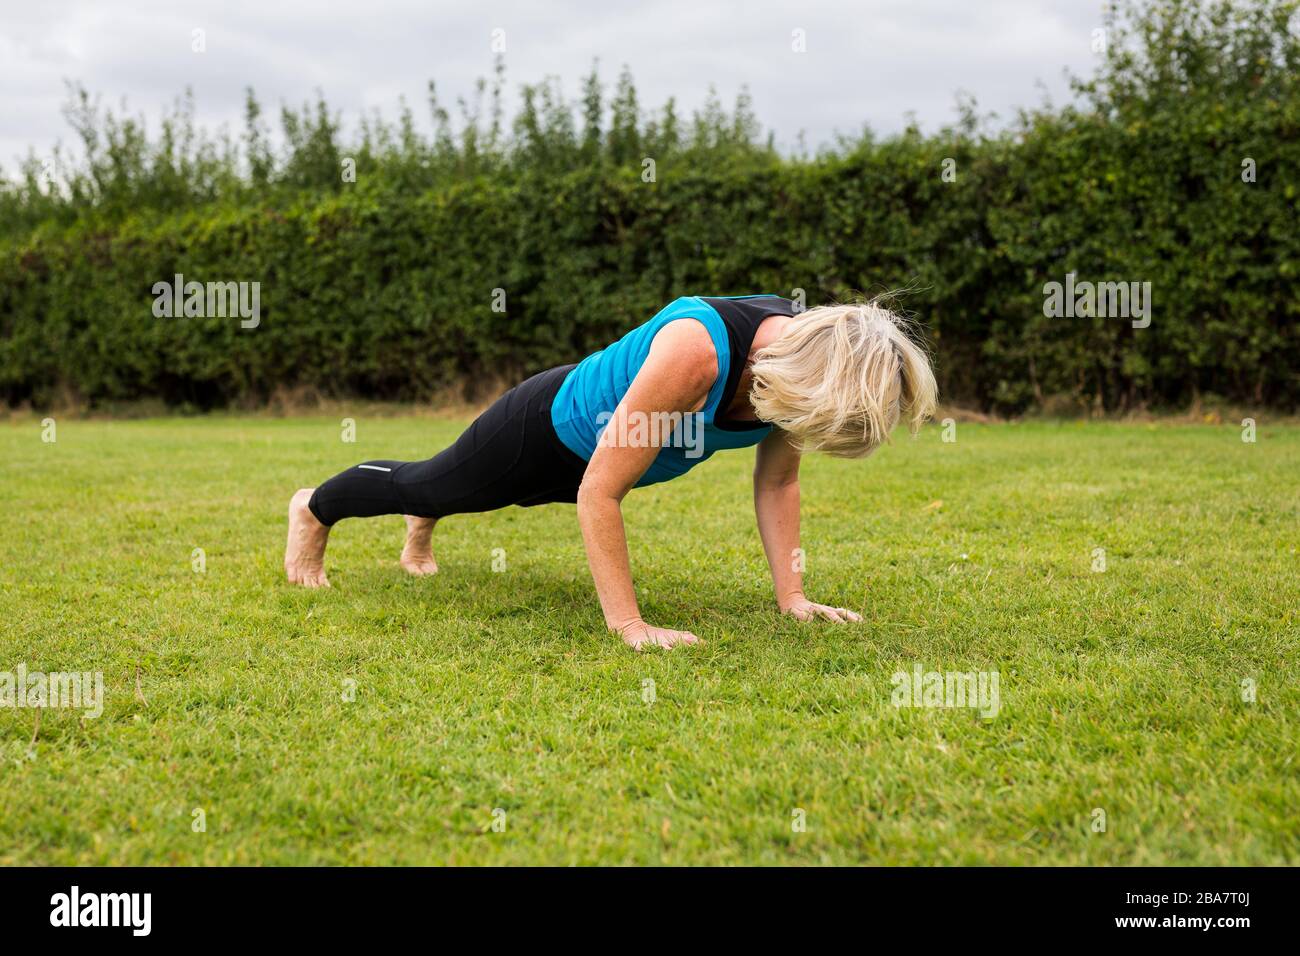 A middle aged woman practicing yoga barefoot outside in a grassy park. She is wearing a bright blue vest and black leggings. The style of yoga she is Stock Photo